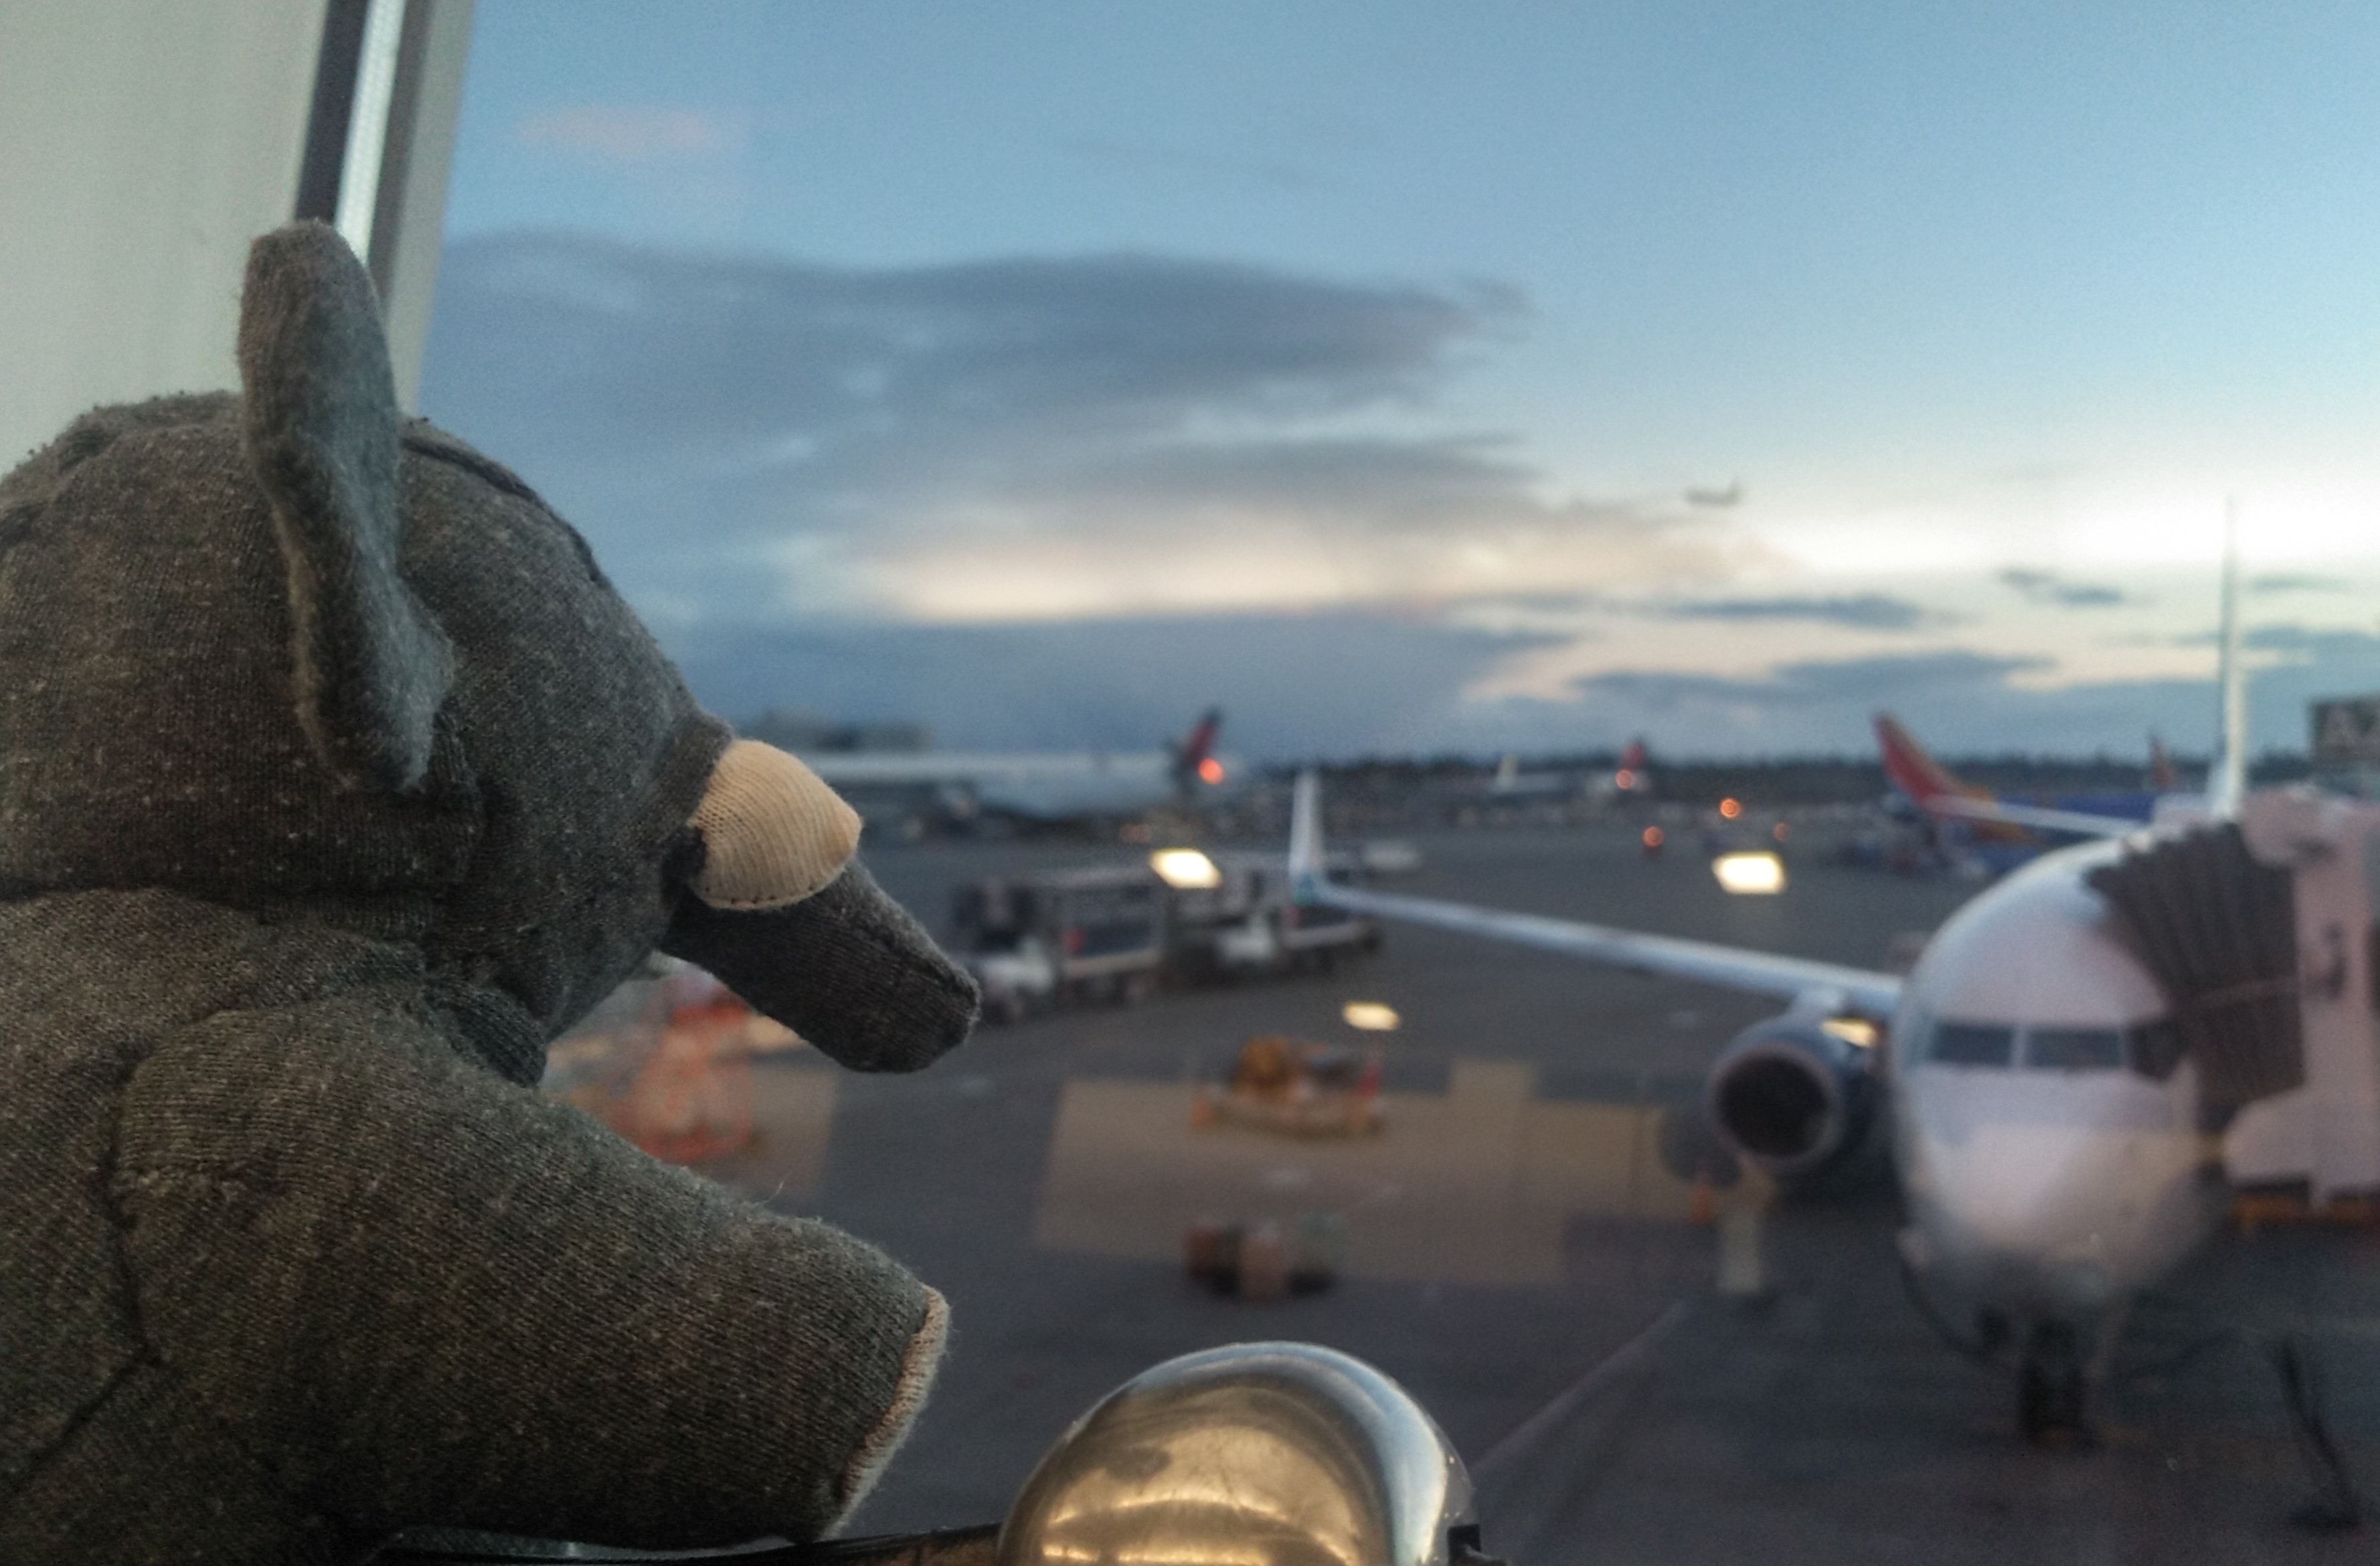 a small elephant looks out the window at an airport